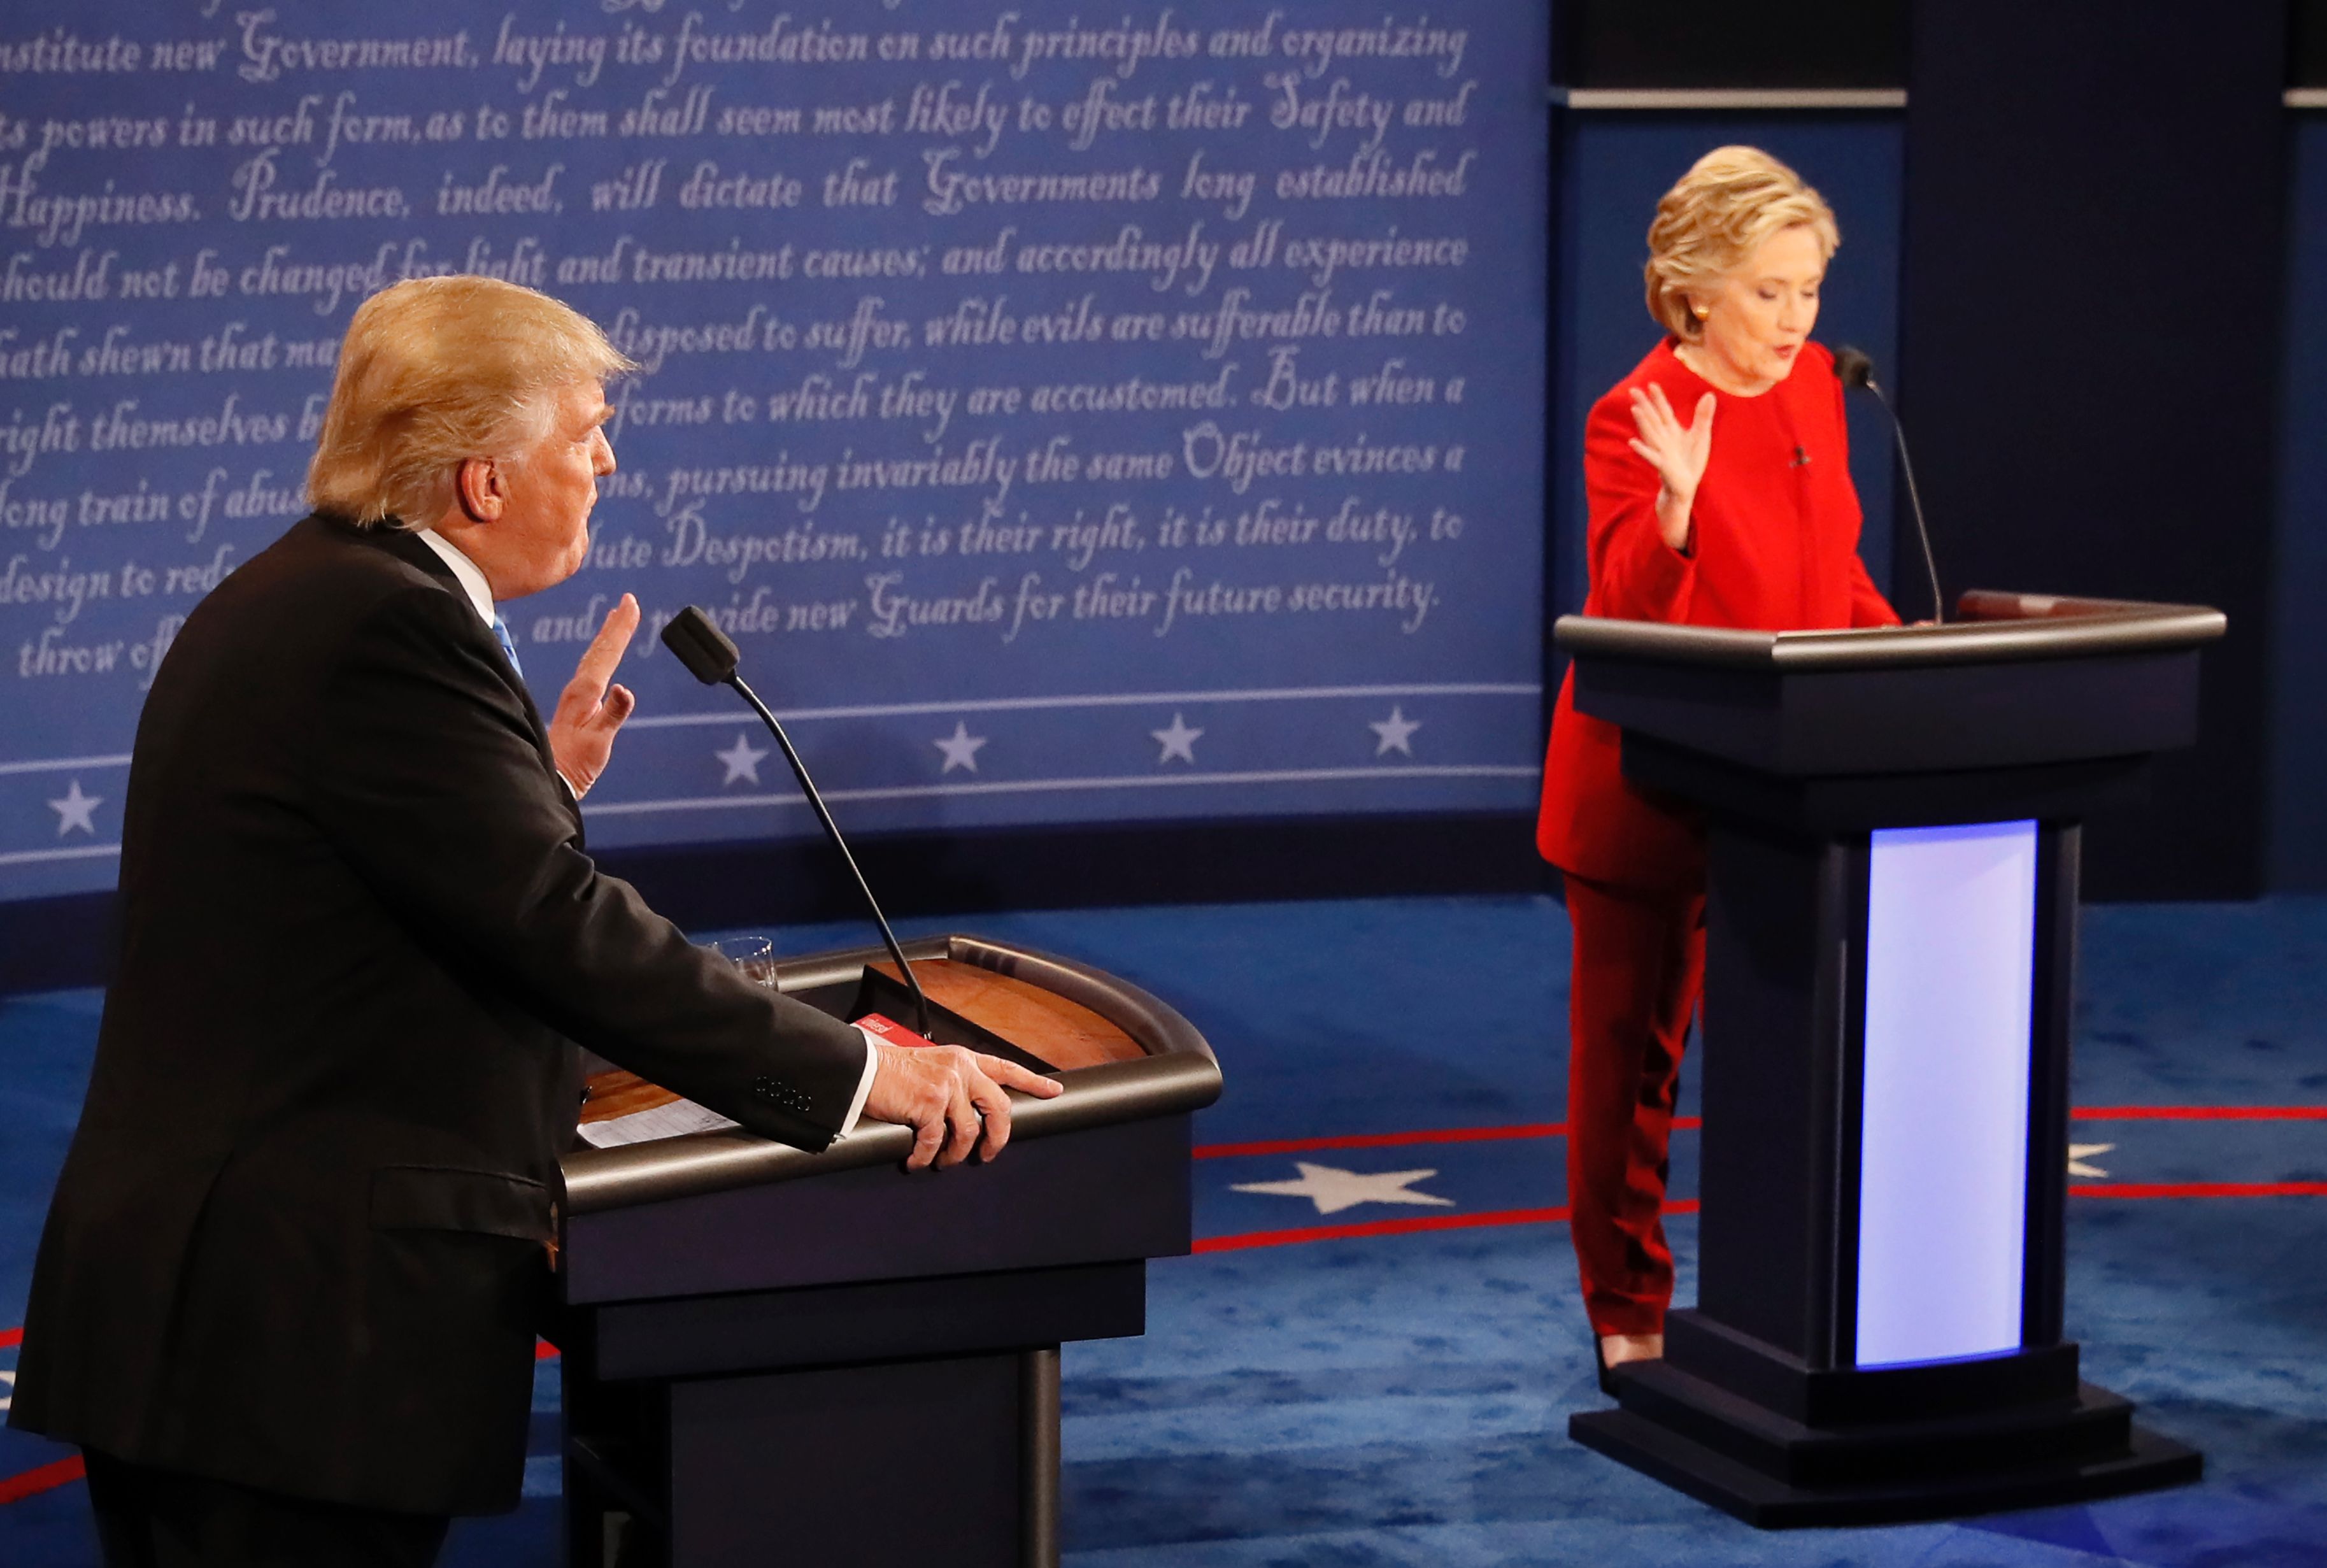 Clinton, Trump clash over race and economy in first debate